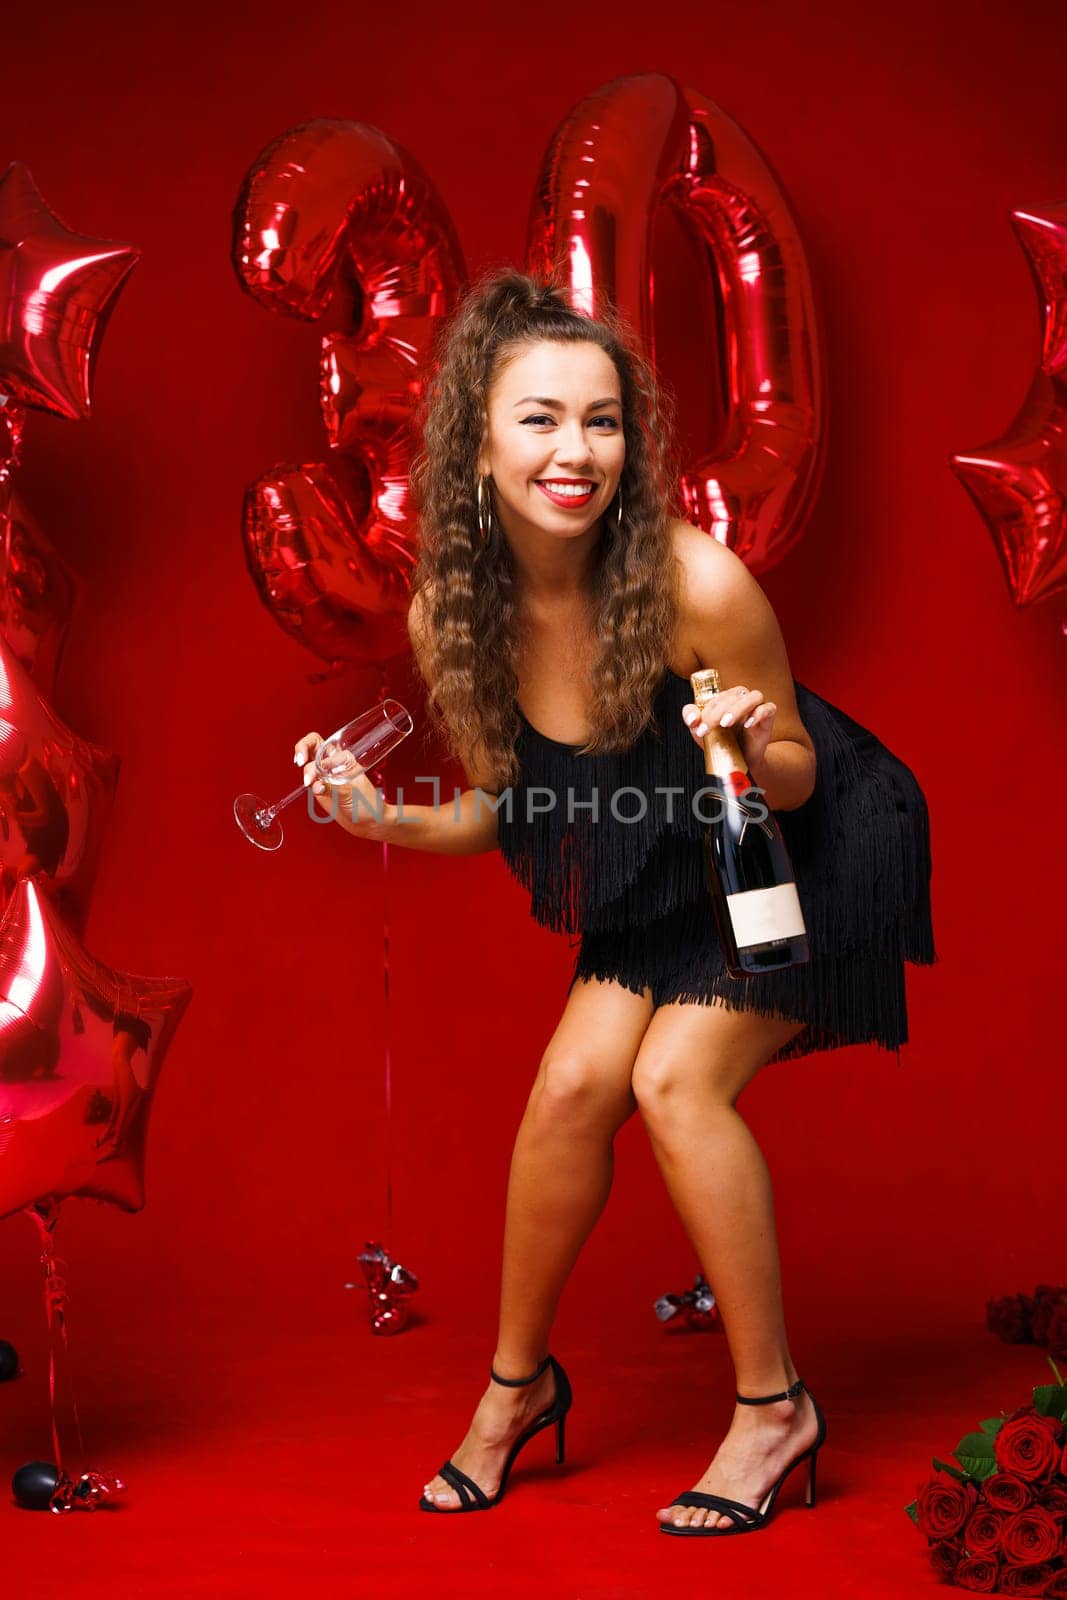 Beautiful woman posing on a red background with balloons holding a bottle of champagne in her hand. Cheerful girl of Caucasian appearance with wavy hair and bright makeup celebrates her 30th birthday